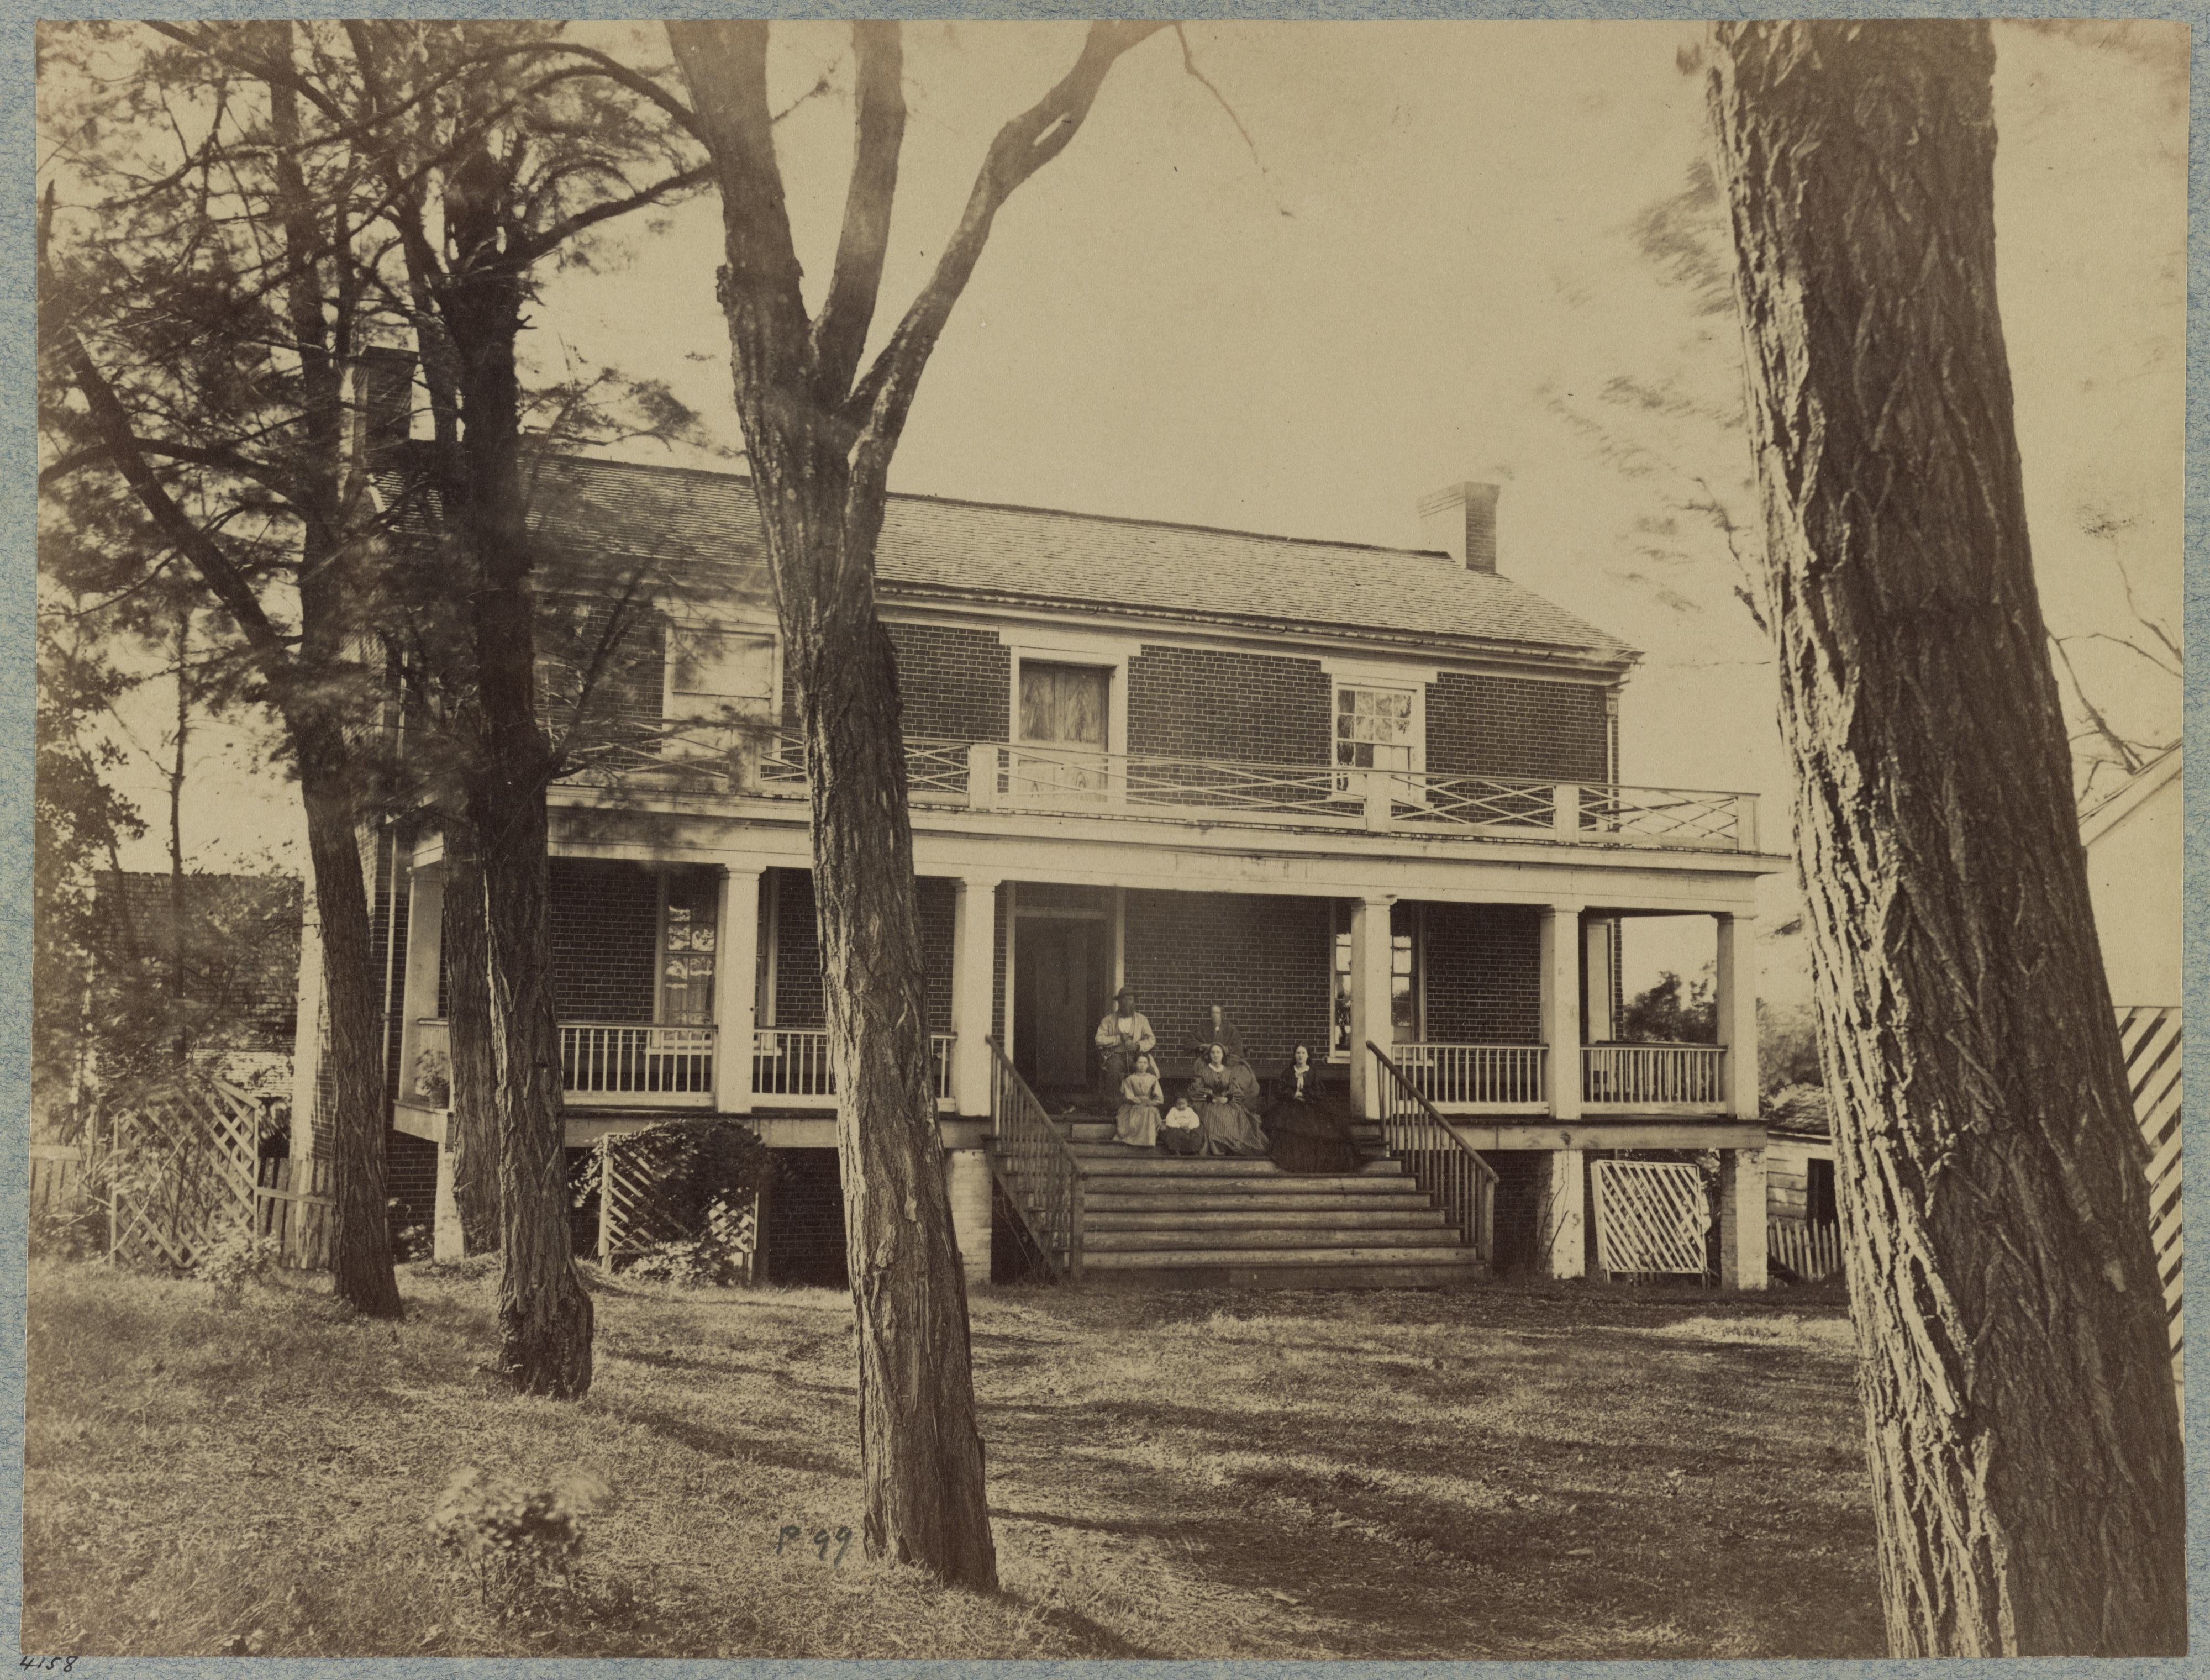 Historic photo of a two-story house with a porch and people sitting outside